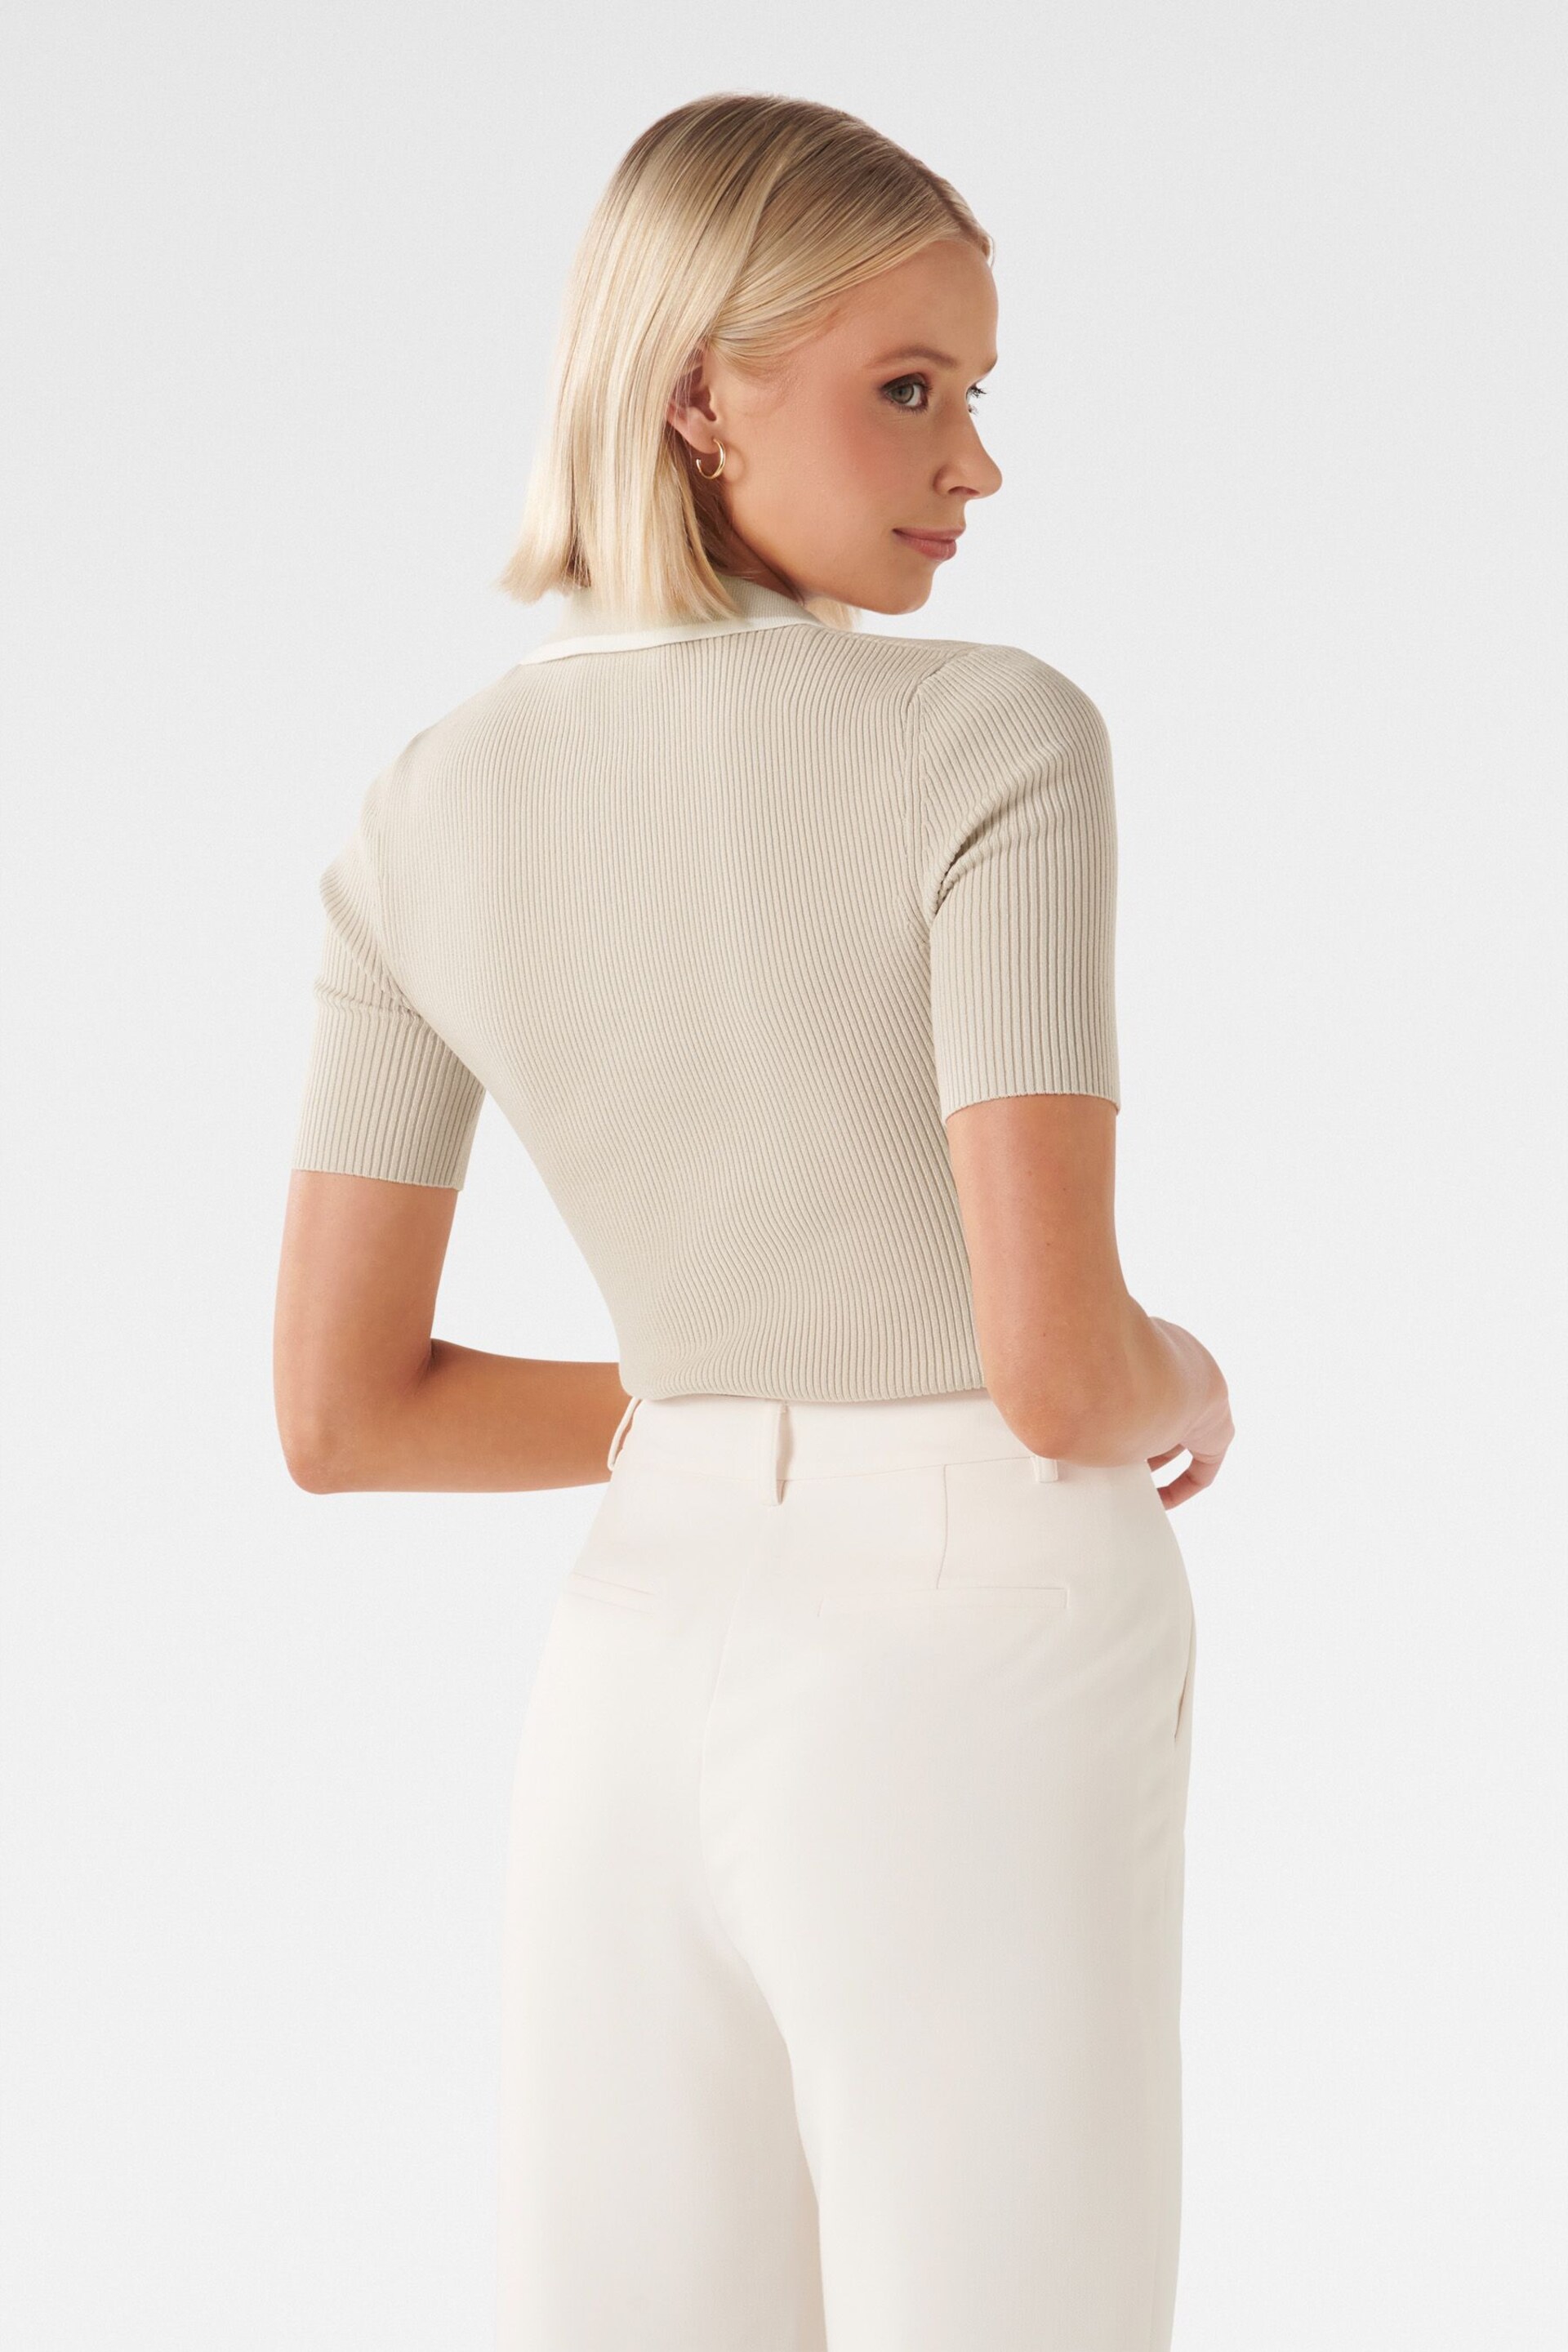 Forever New Cream Jo Collar Knit Polo Top - Image 4 of 5